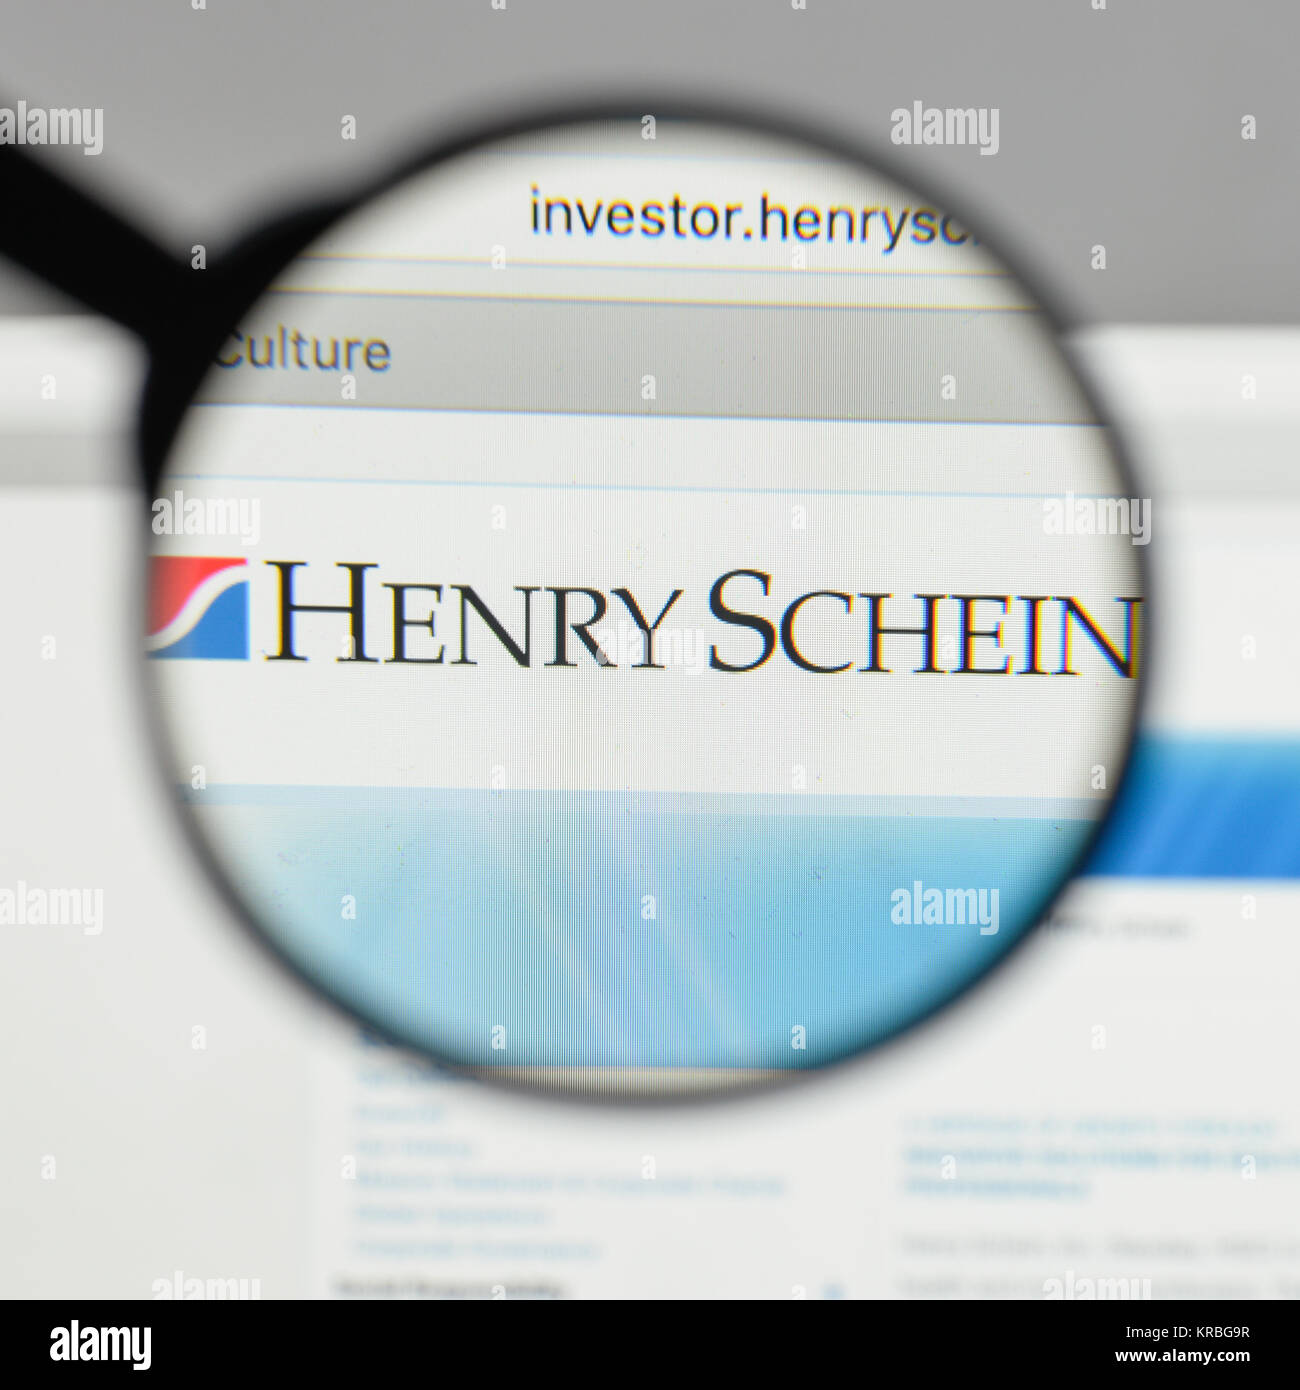 Milan, Italy - August 10, 2017: Henry Schein logo on the website homepage. Stock Photo